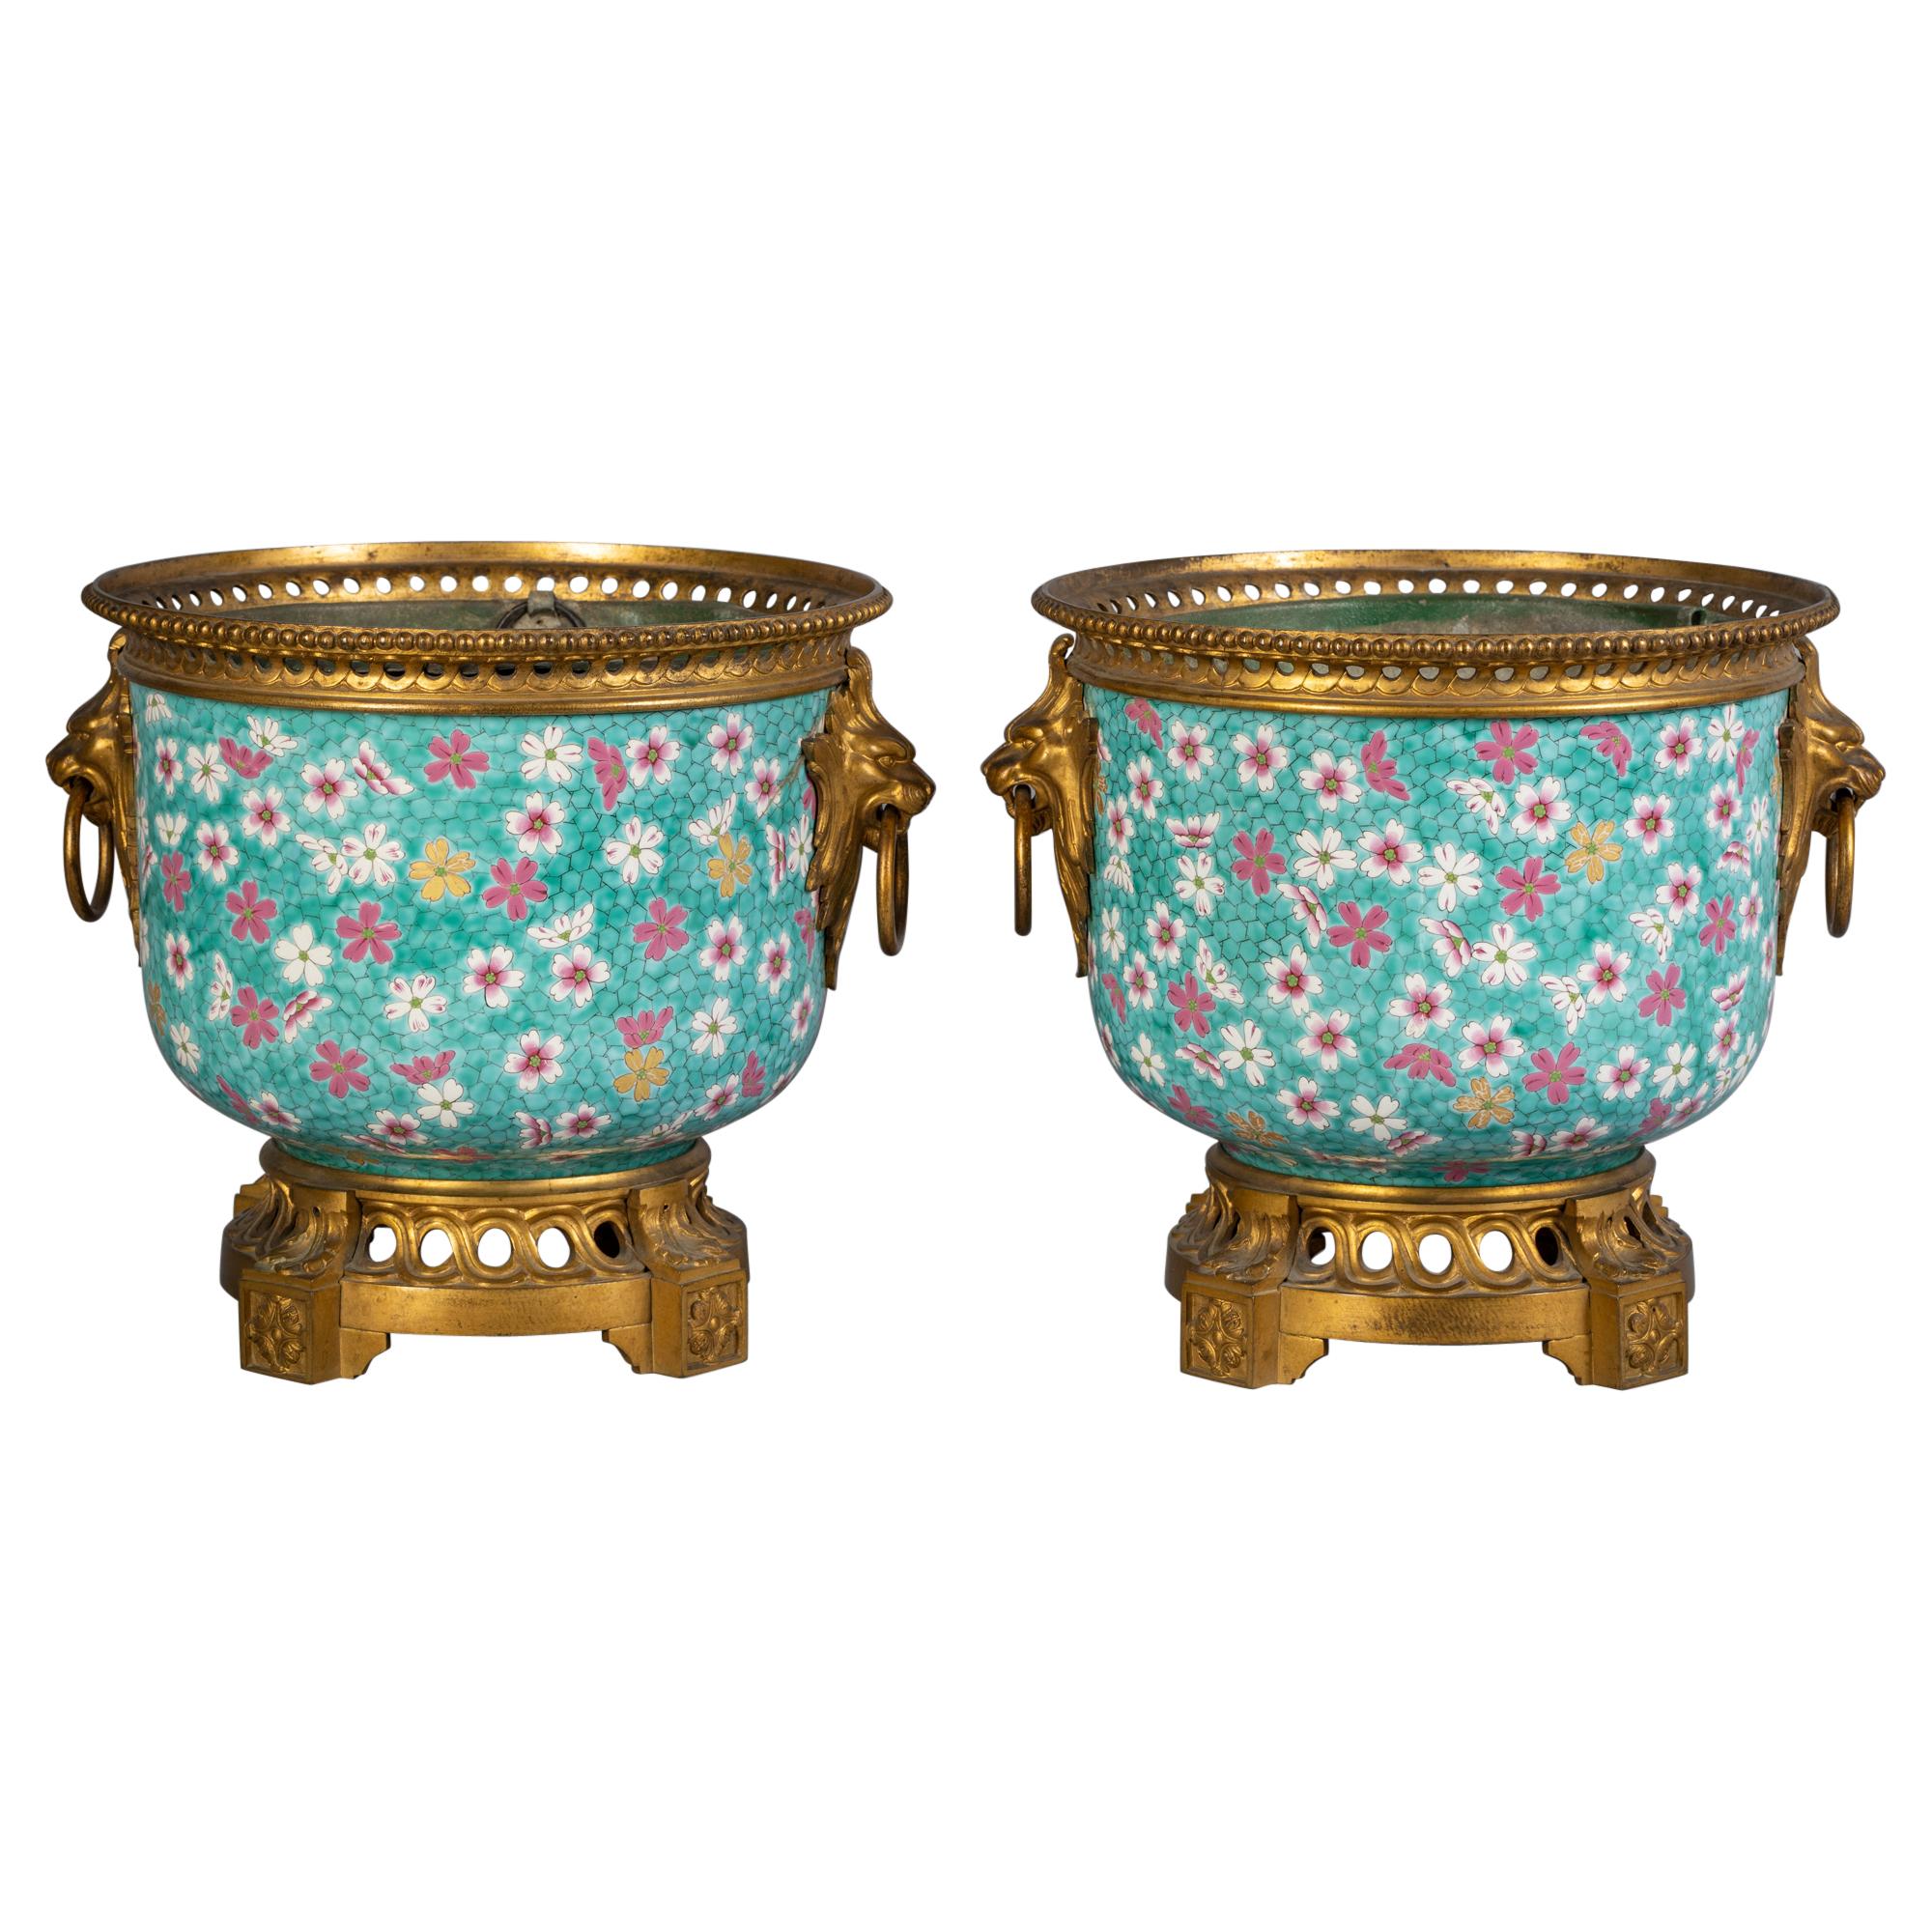 Pair of Gilt Bronze Mounted French Porcelain Jardinières, Late 19th Century